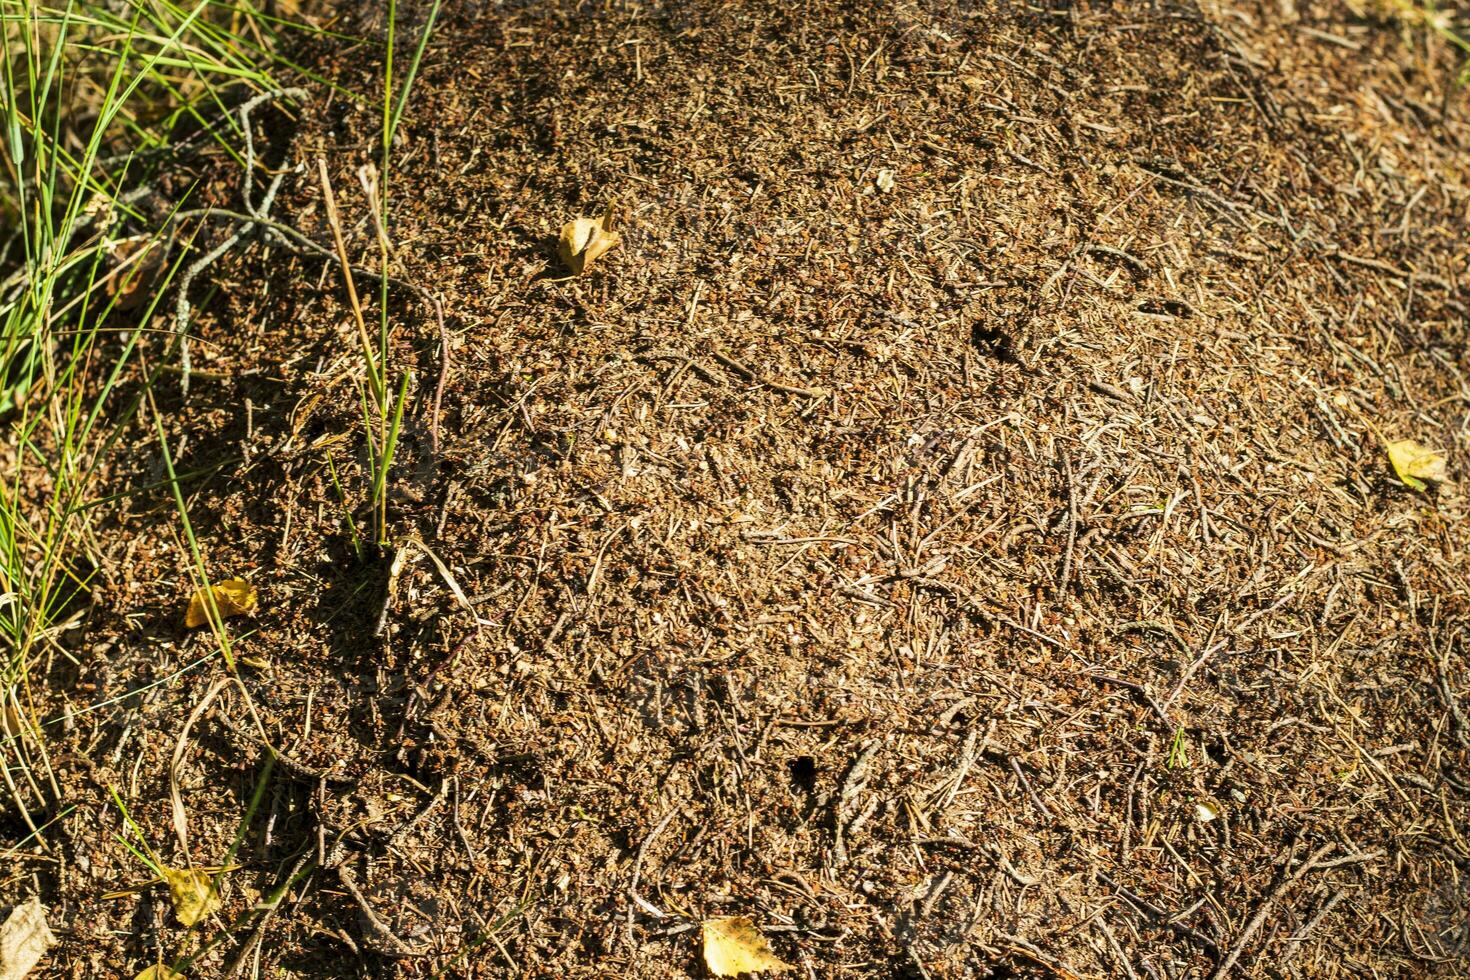 Close up shot of the anthill. Nature photo